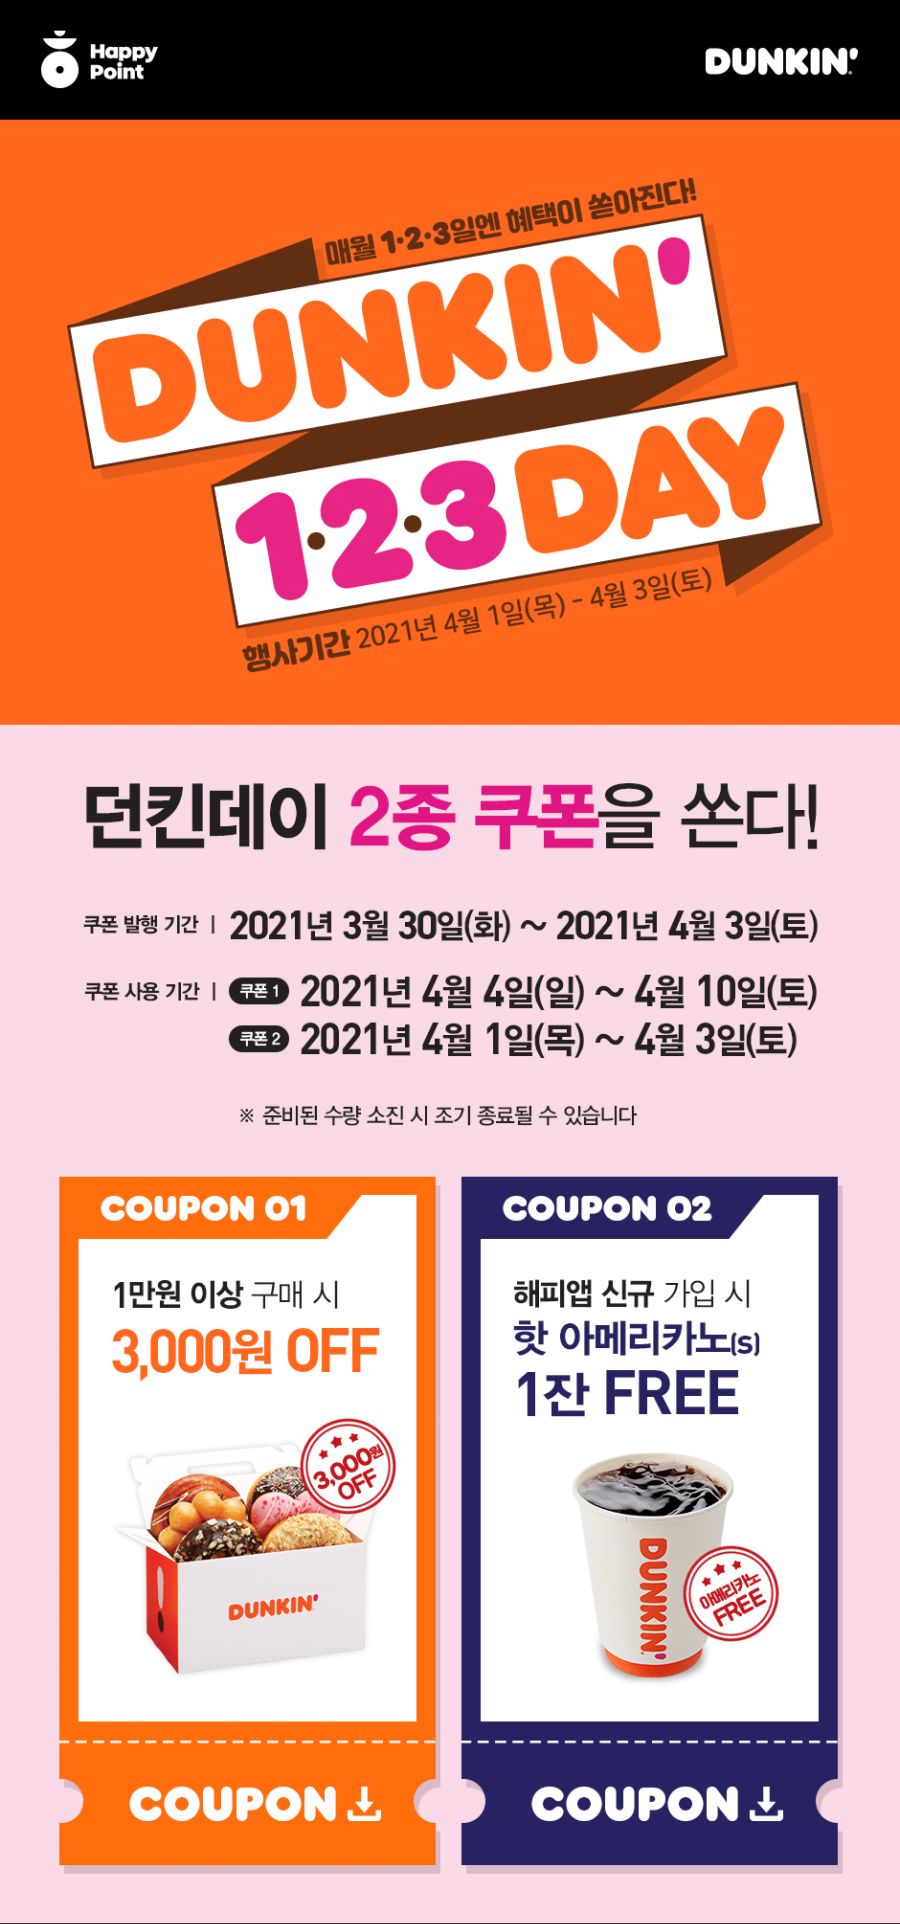 210331_event_dunkinday_coupon2_pc.jpg